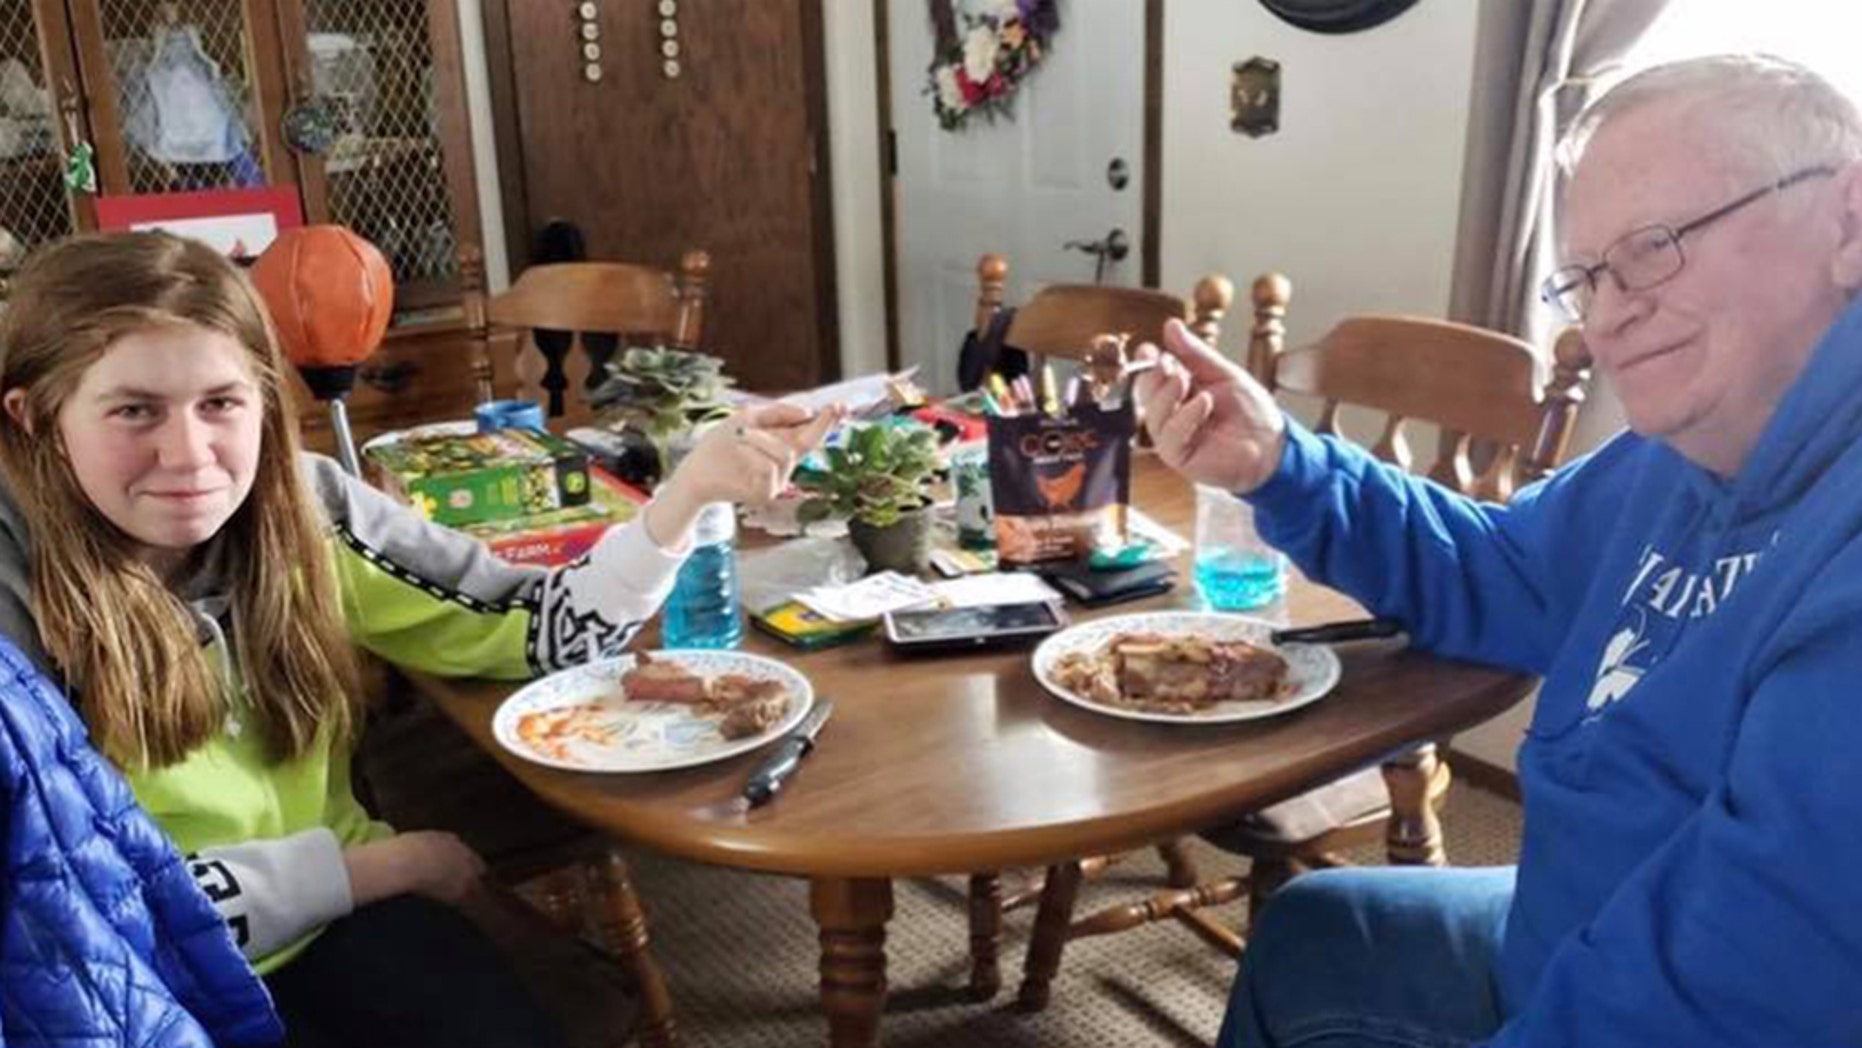 Jayme Closs enjoys steak dinner with family weeks after being found safe